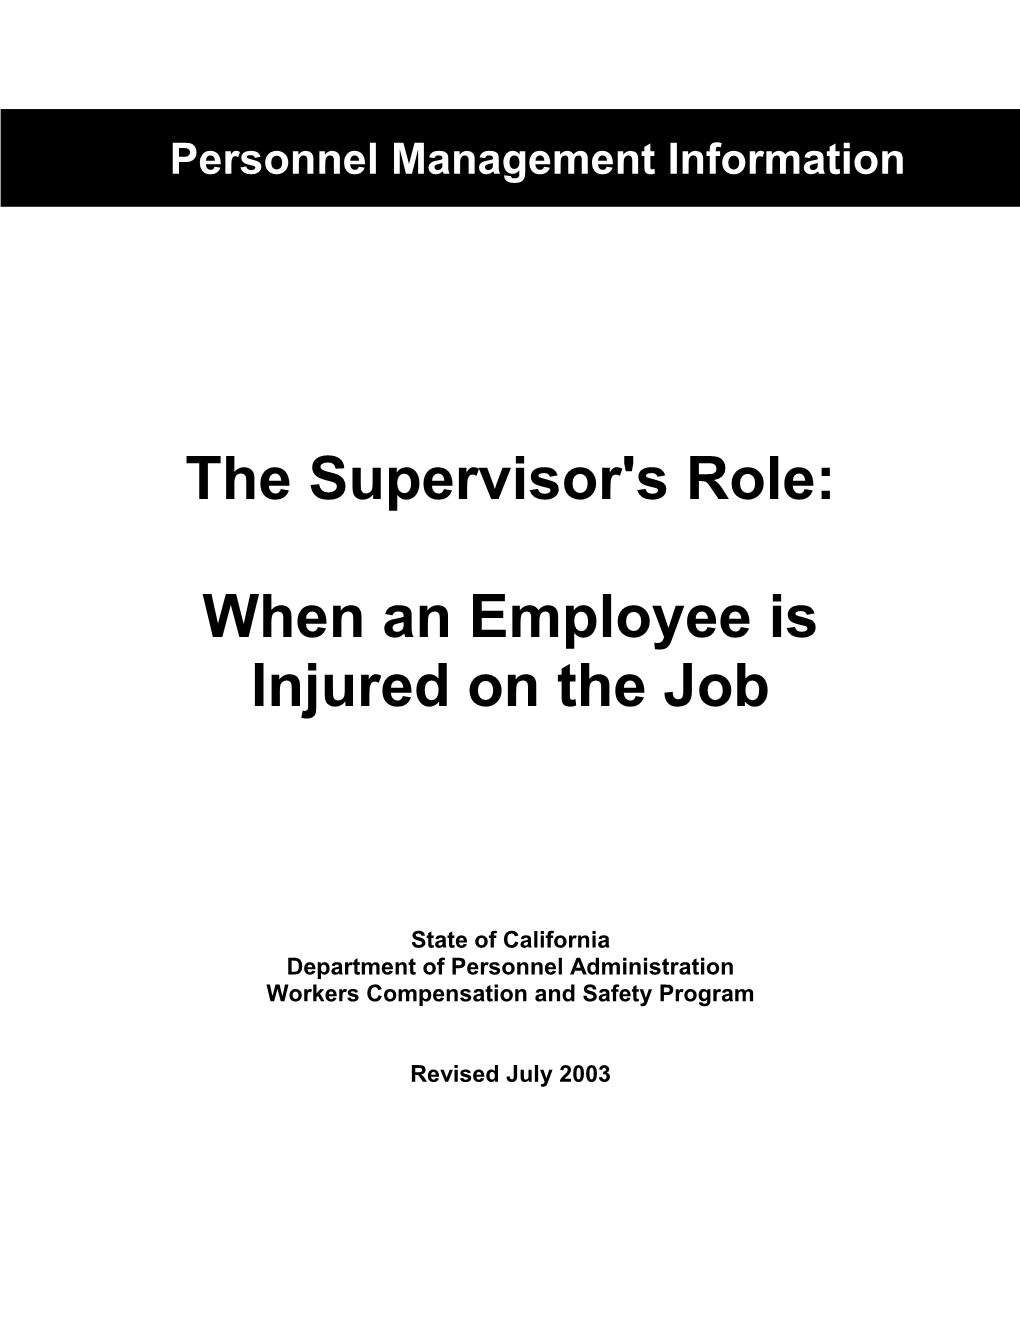 The Supervisor's Role In